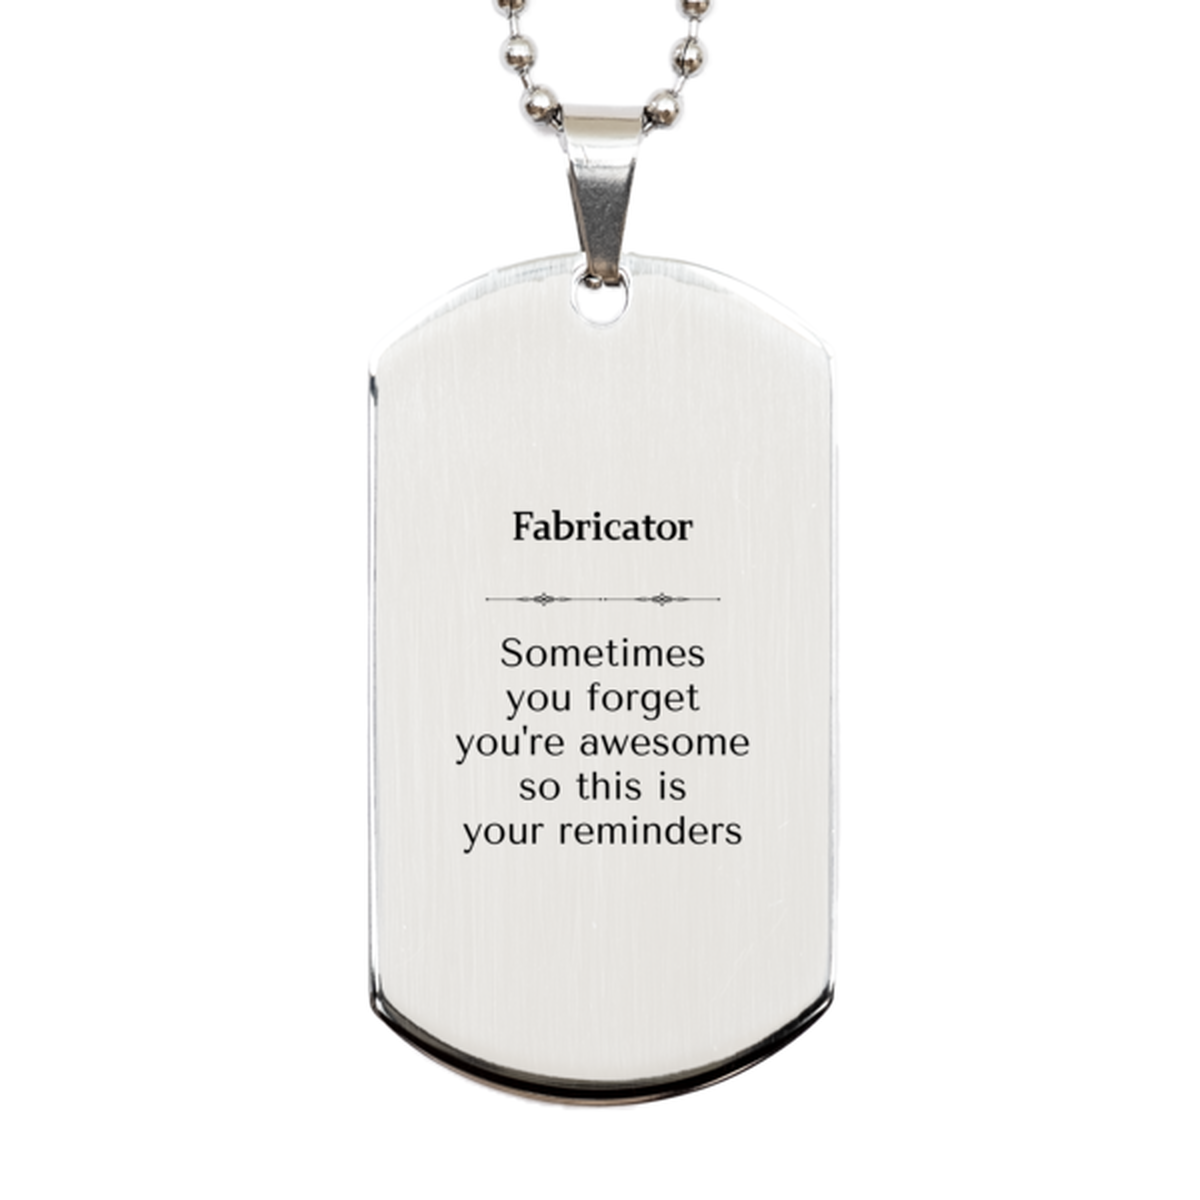 Sentimental Fabricator Silver Dog Tag, Fabricator Sometimes you forget you're awesome so this is your reminders, Graduation Christmas Birthday Gifts for Fabricator, Men, Women, Coworkers